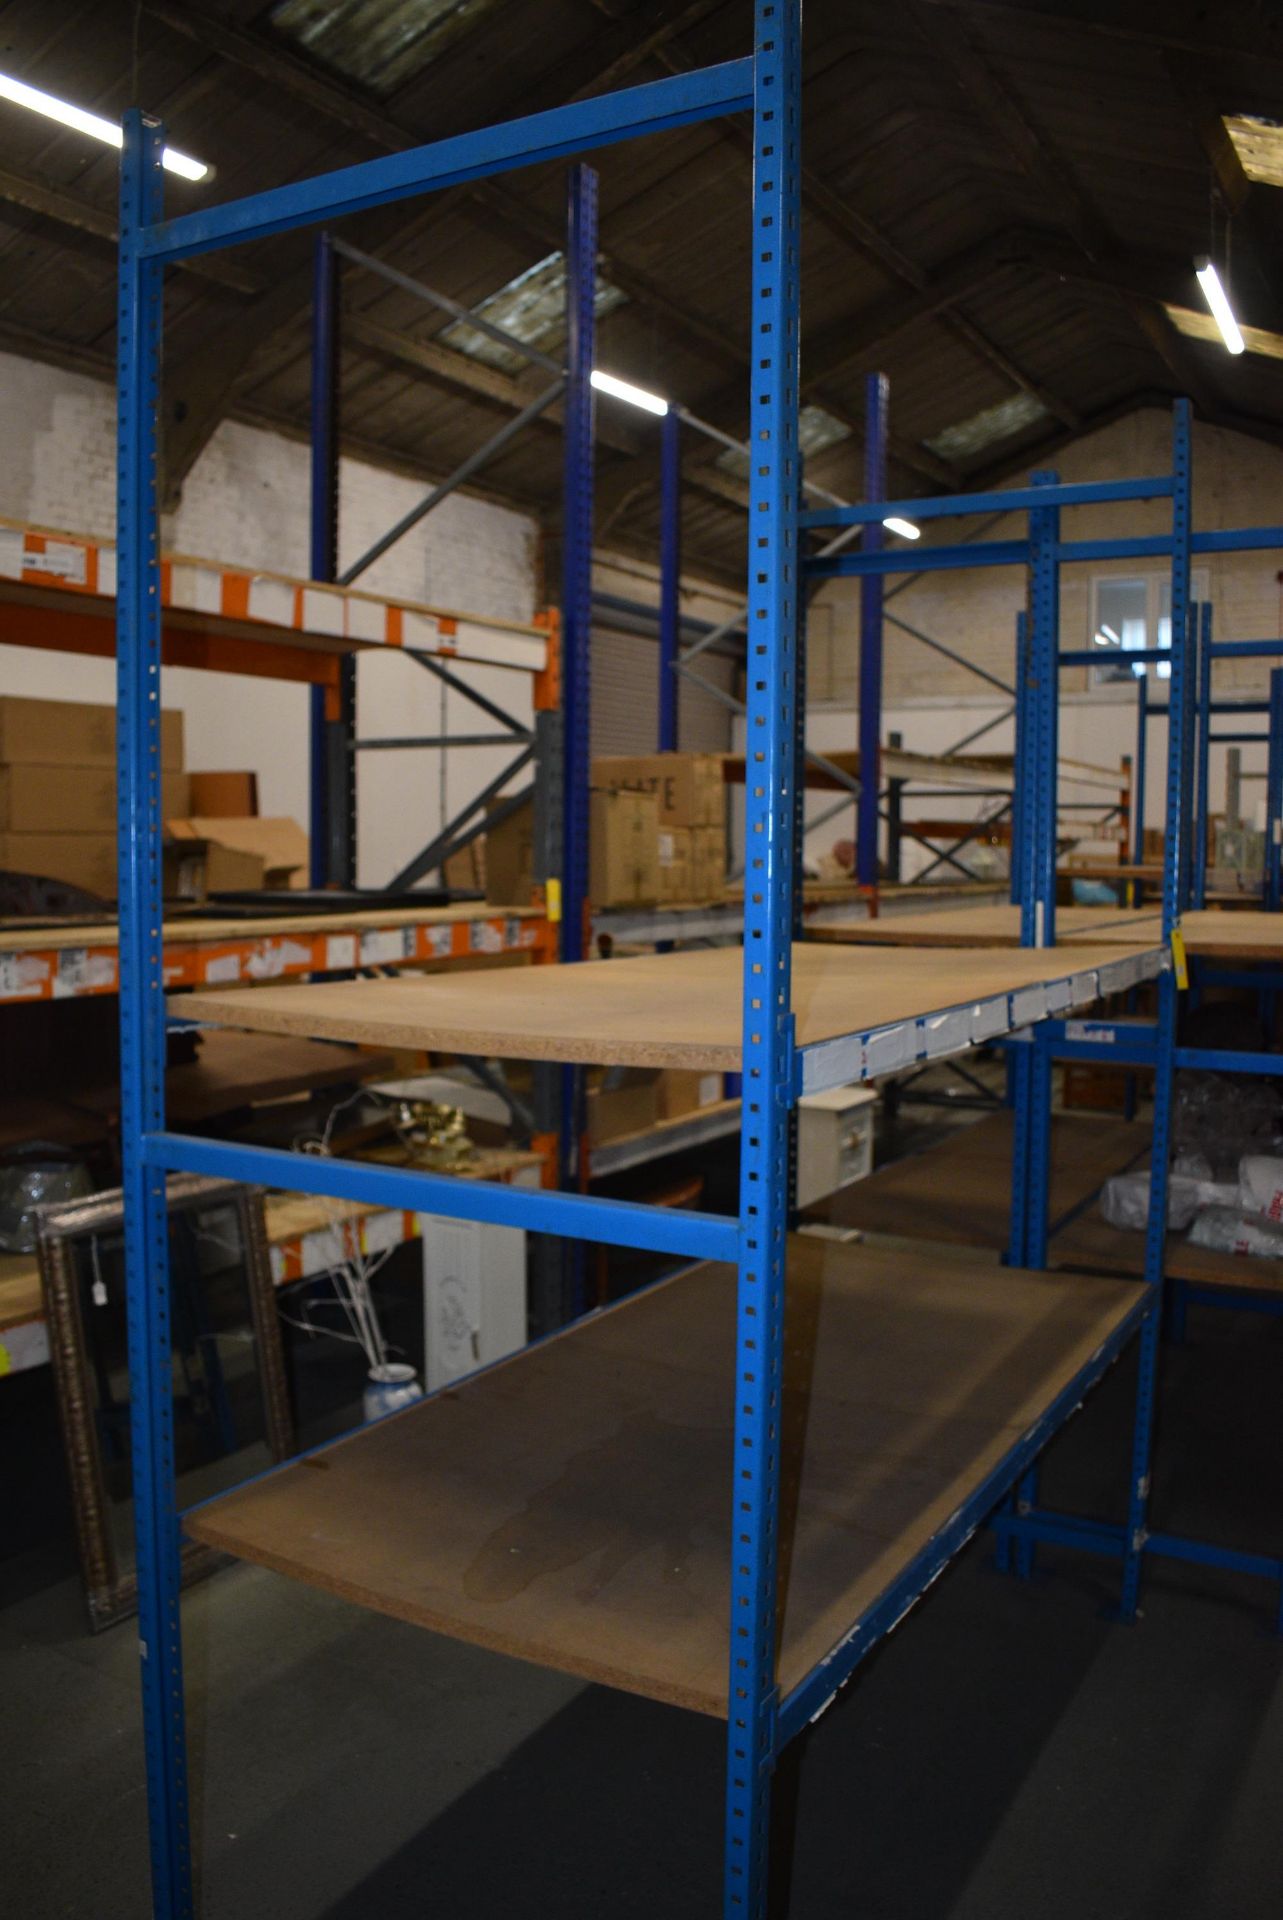 *One Bay of Planned Storage Systems Ltd Racking 90x185cm x 246cm high Comprising Two Uprights and